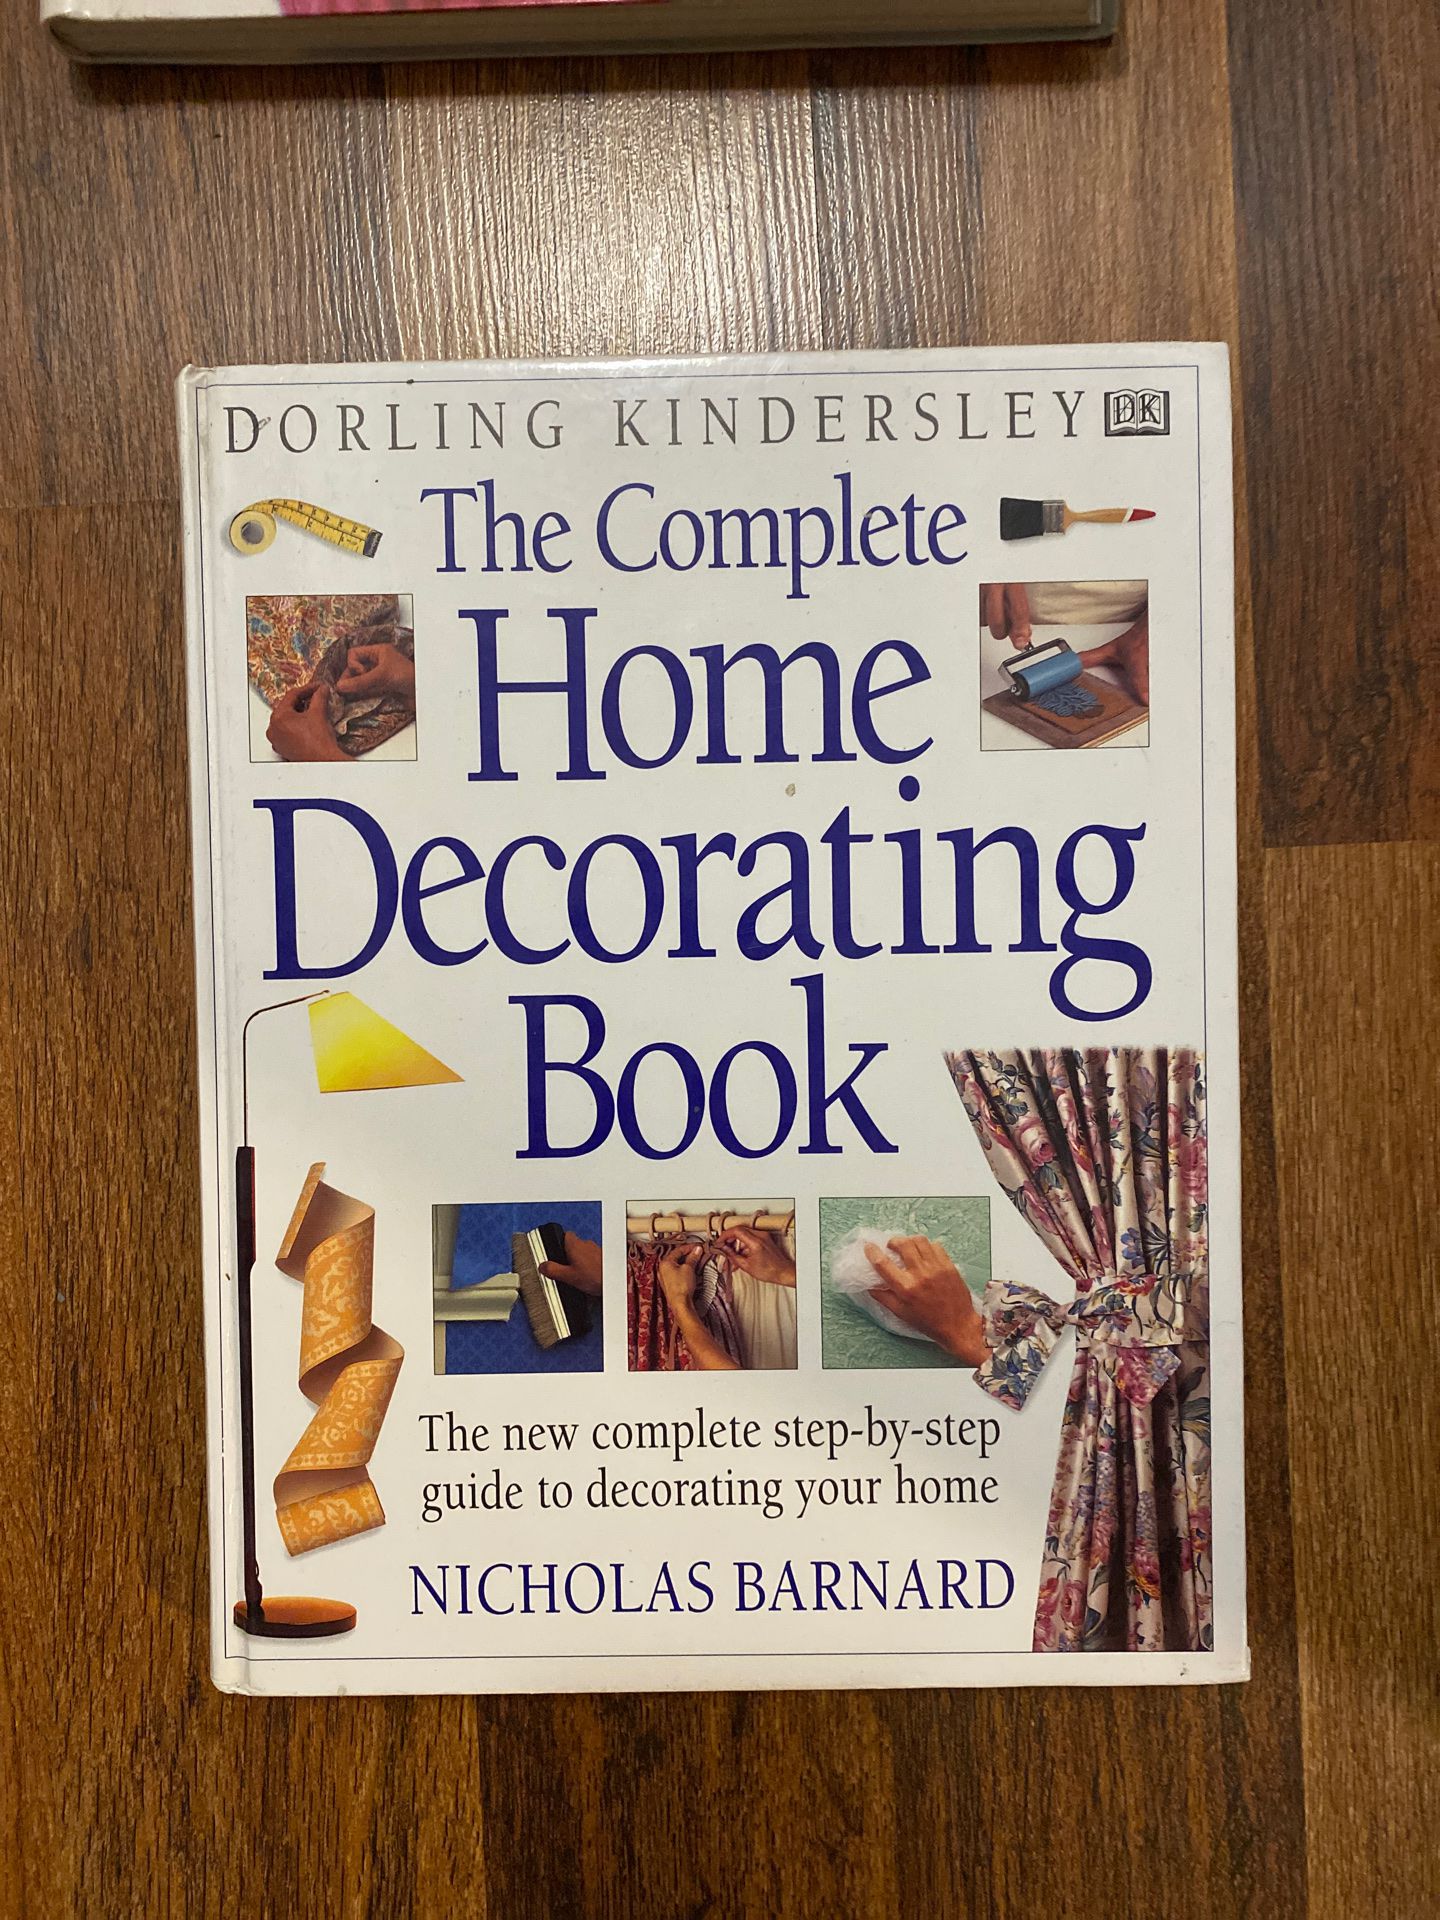 Home decorating book